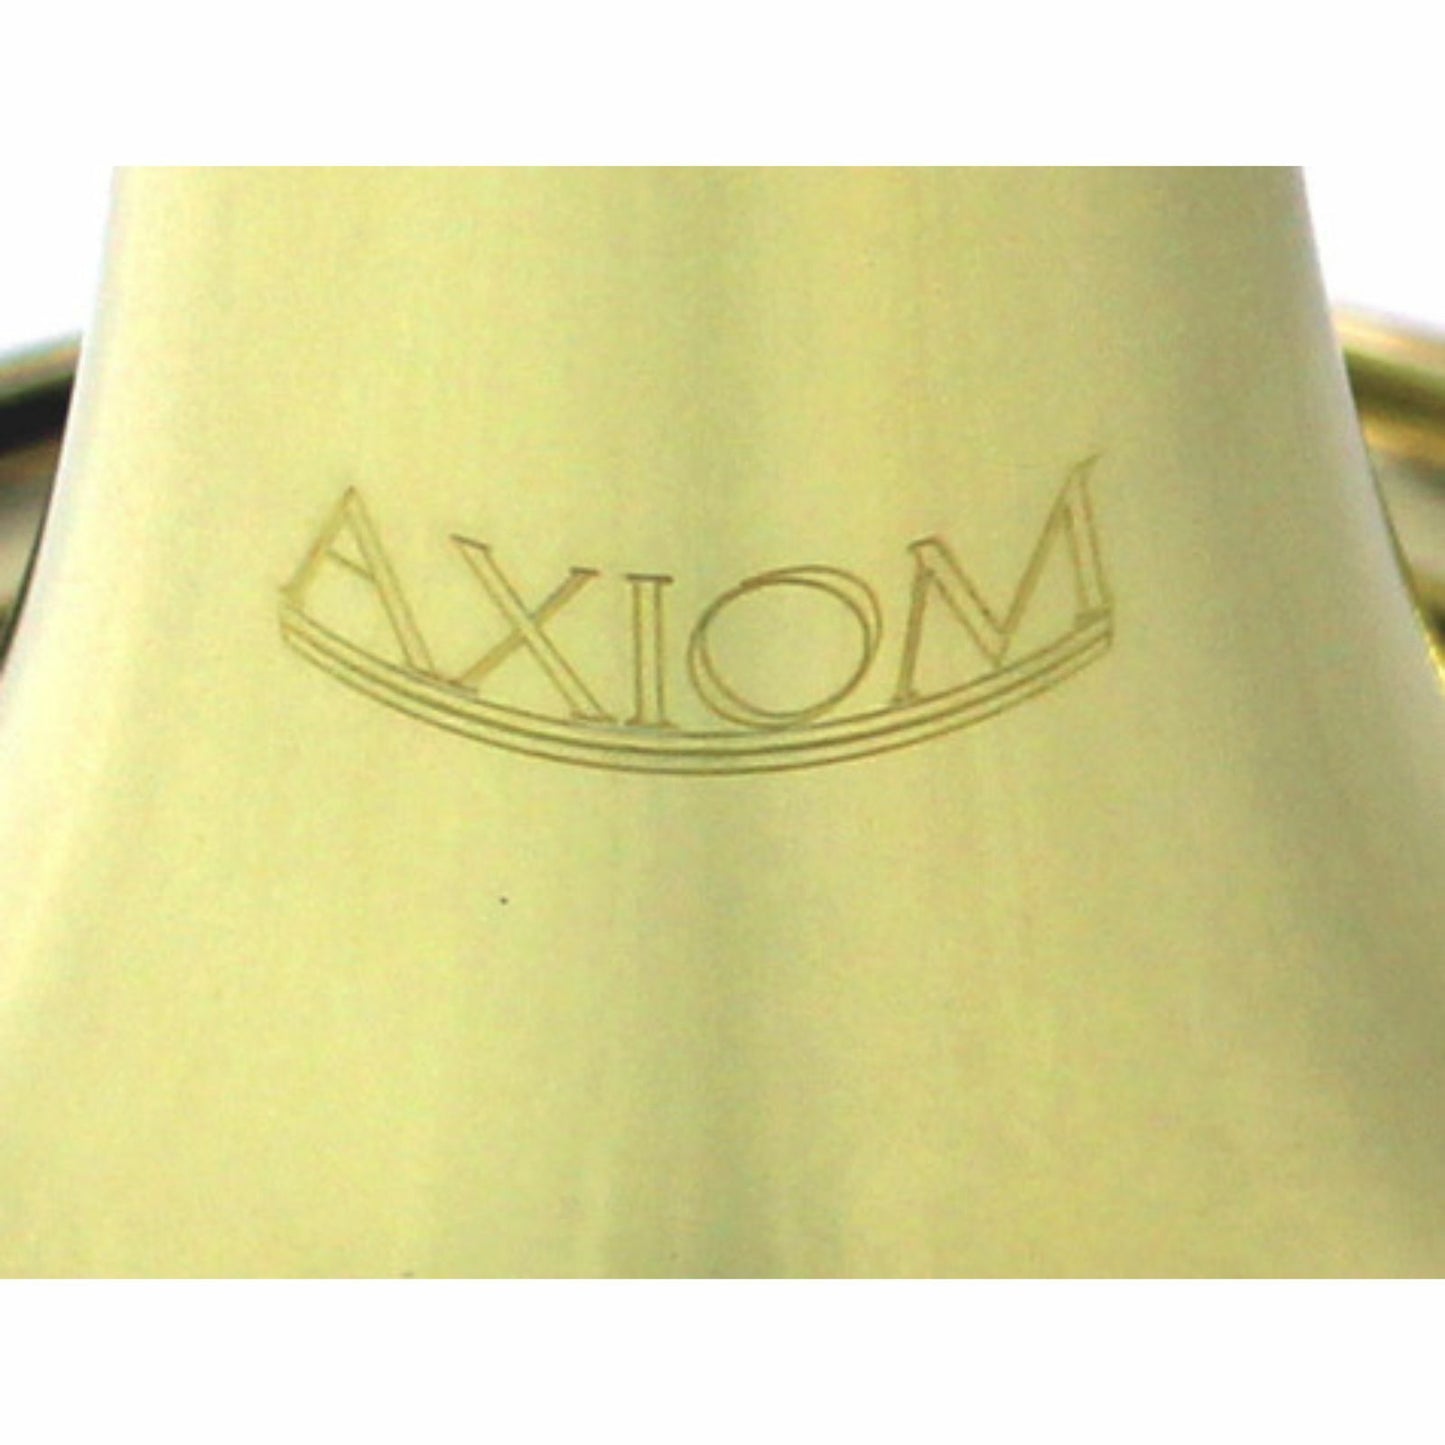 Axiom Prelude Trumpet Outfit - School Band